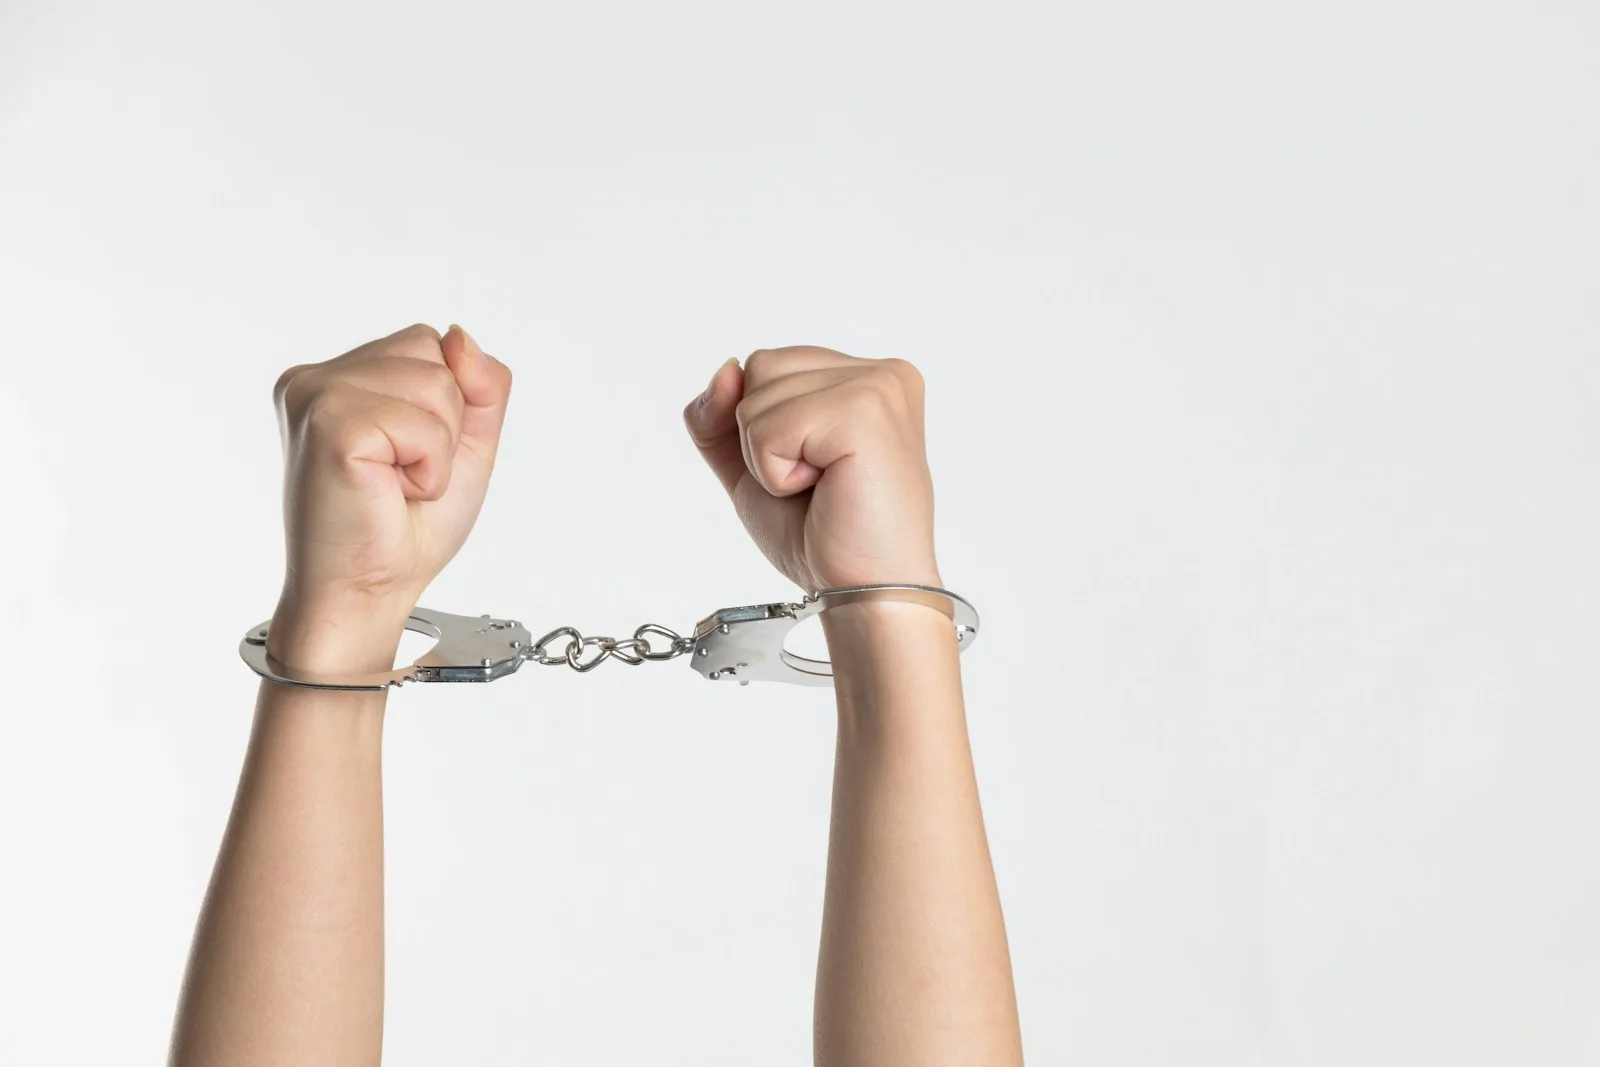 person showing handcuff